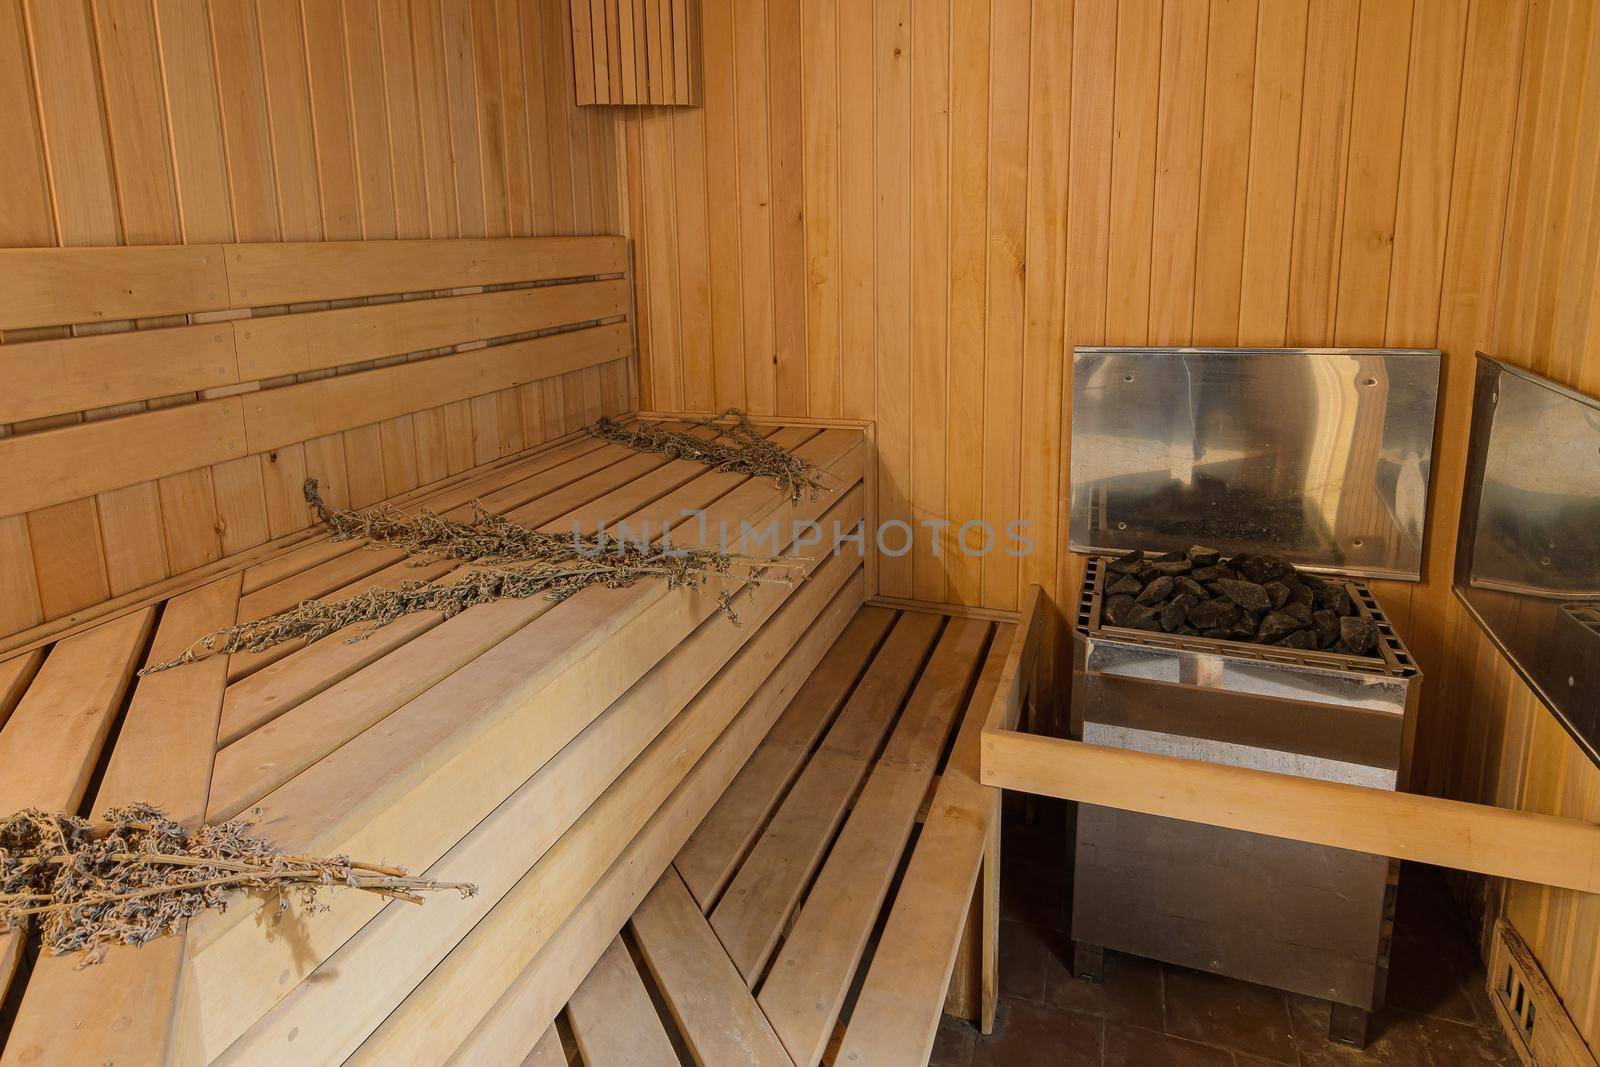 Interior of a sauna in a private house with an electric boiler